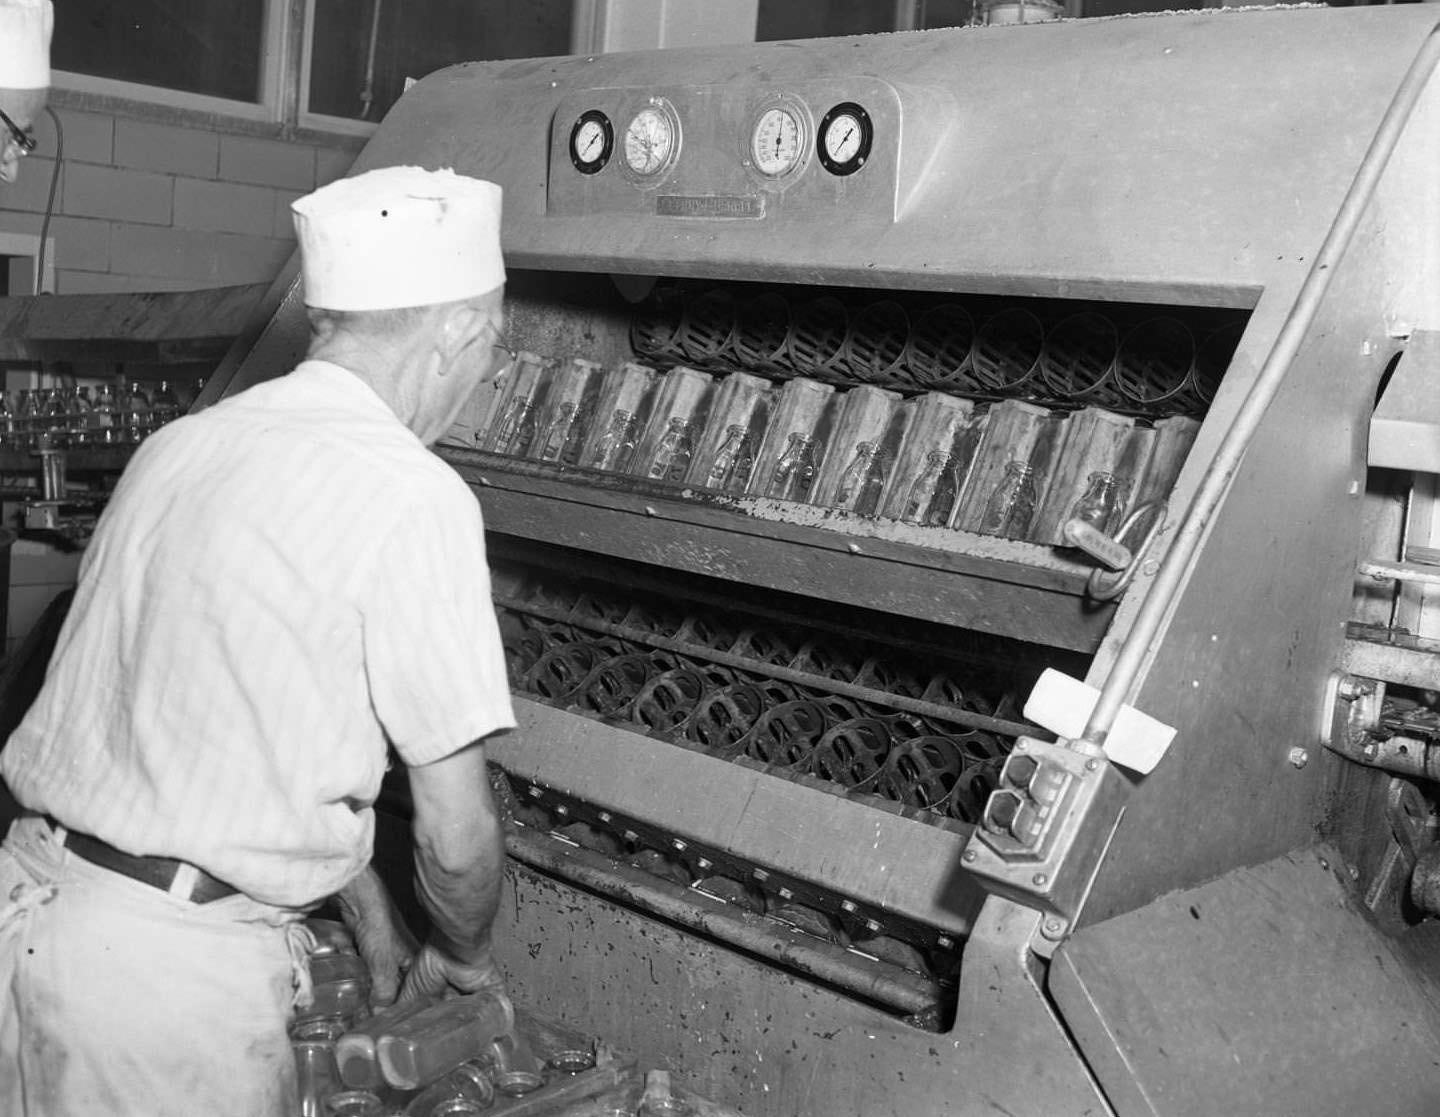 A machine at a dairy in Abilene, 1958. Fourteenth and Butternut Streets. A worker is putting glass bottles into the machine.